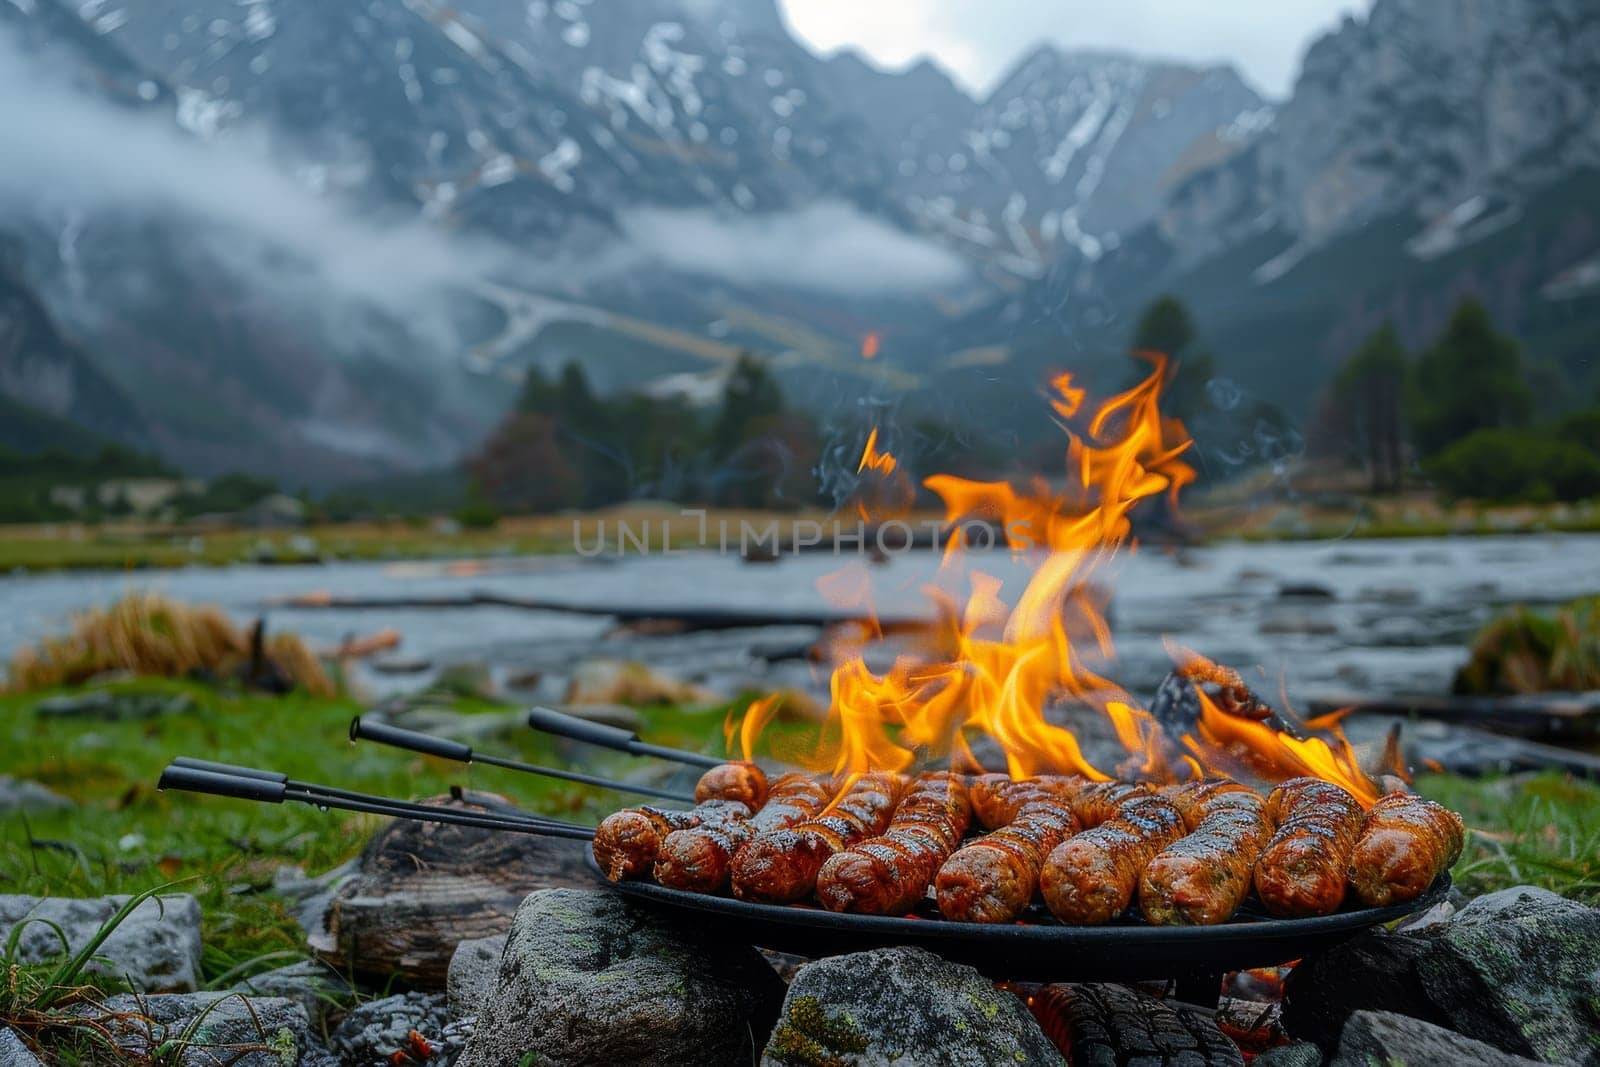 A plate of hot dogs is being cooked over a fire in a grassy field. The scene is peaceful and serene, with the mountains in the background adding to the sense of tranquility